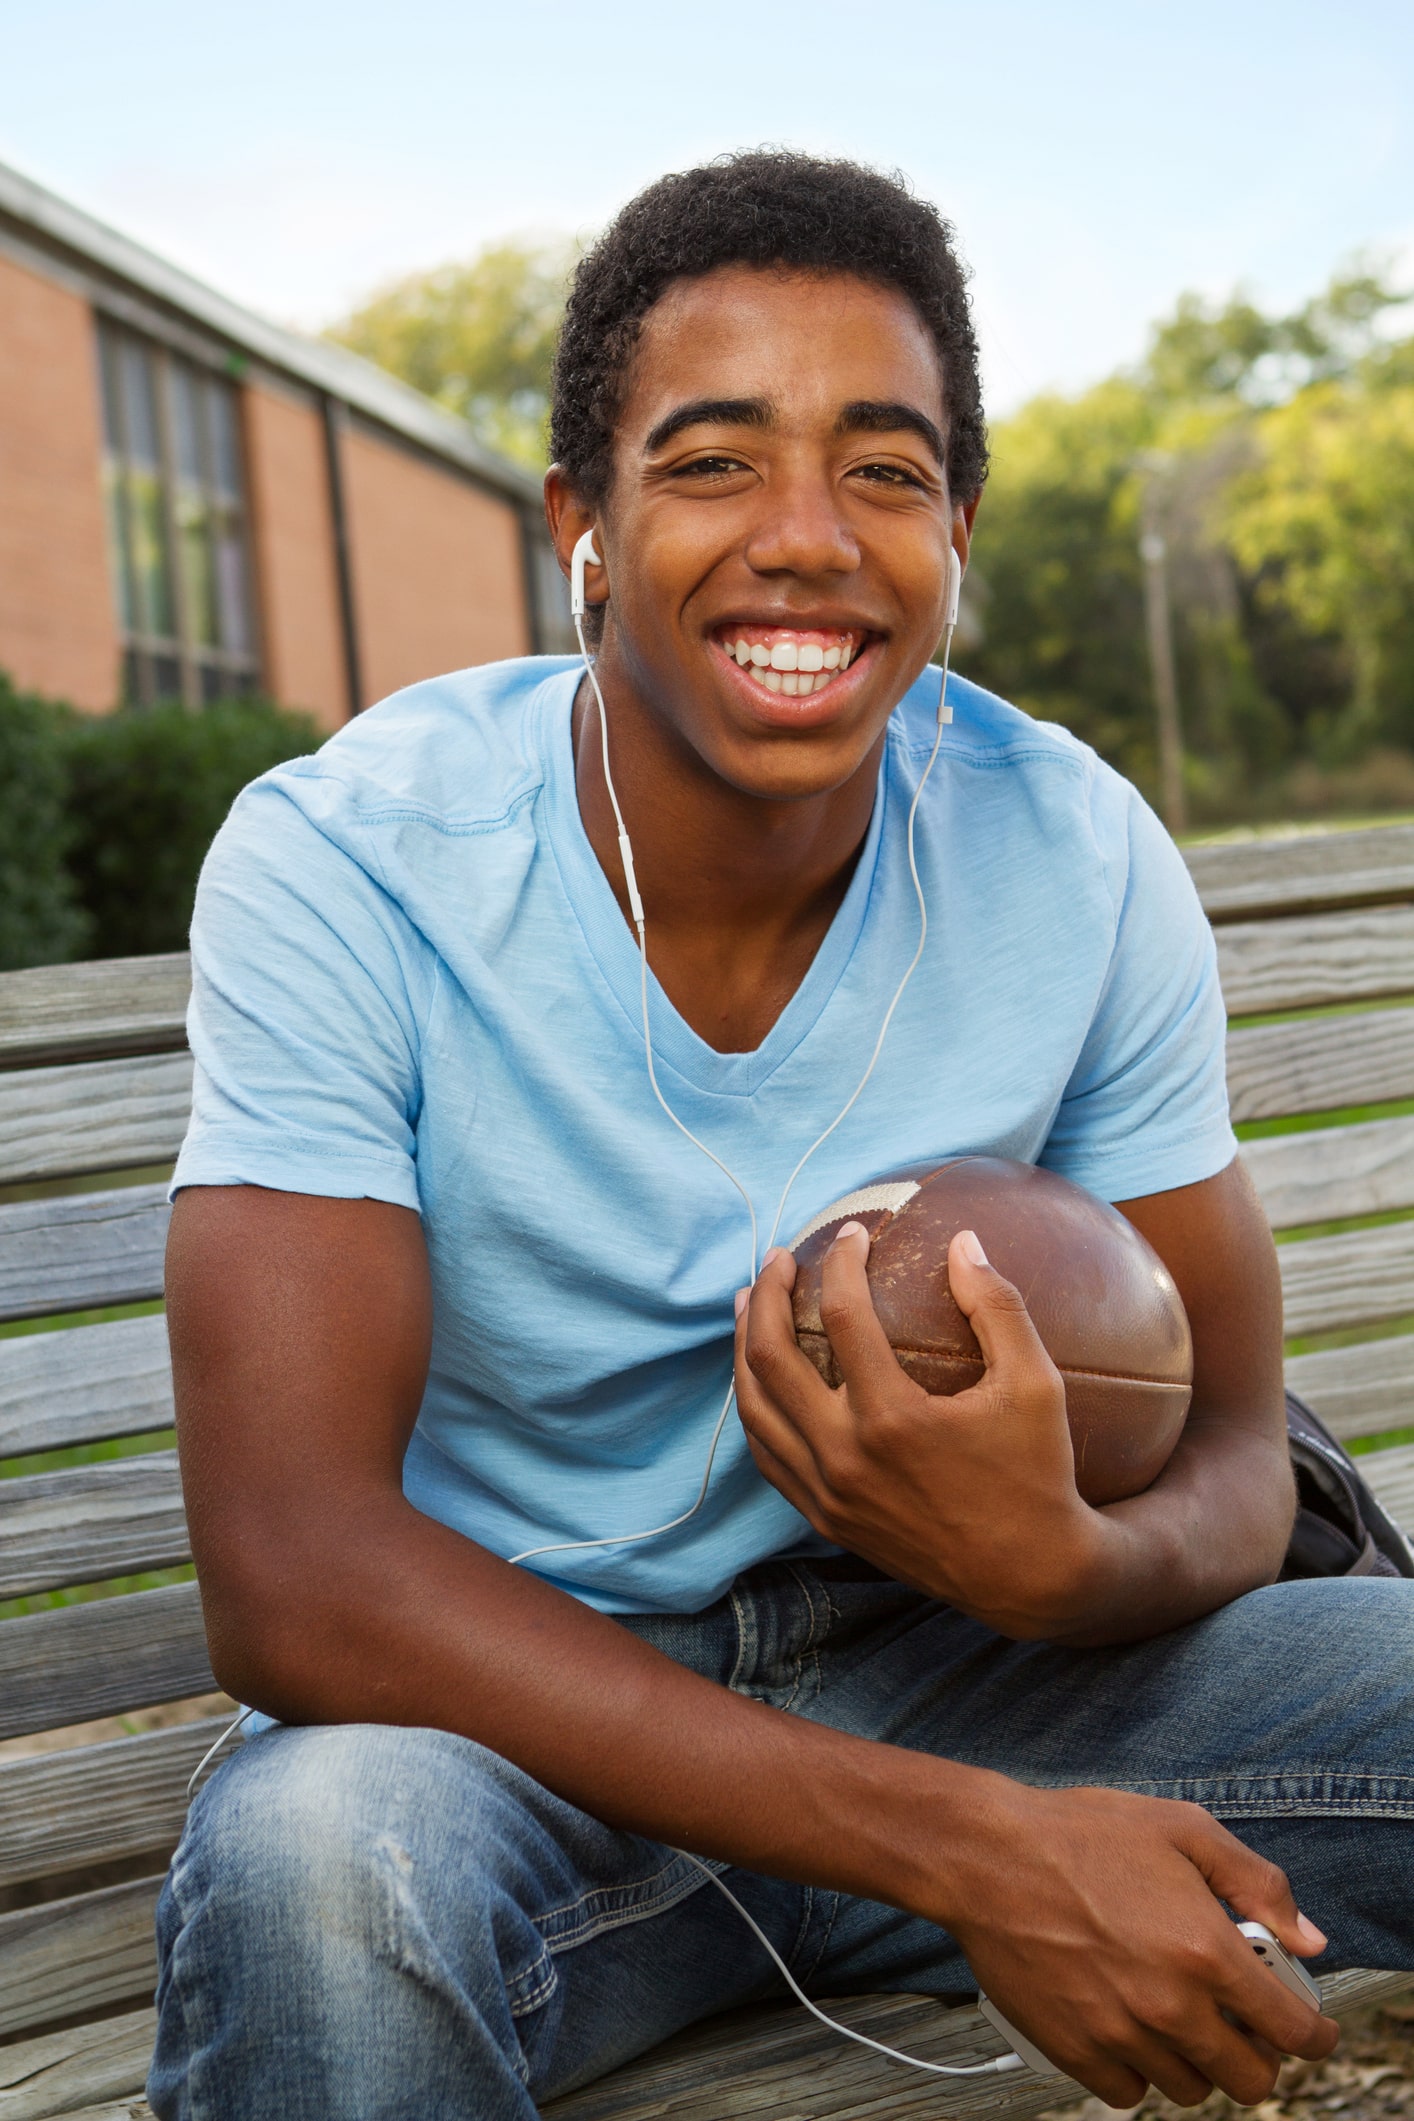 A young man sits on a wooden bench outdoors, wearing a light blue t-shirt and jeans. He is smiling, holding a football in one hand, and has white earphones in his ears. A brick building and trees are visible in the background.